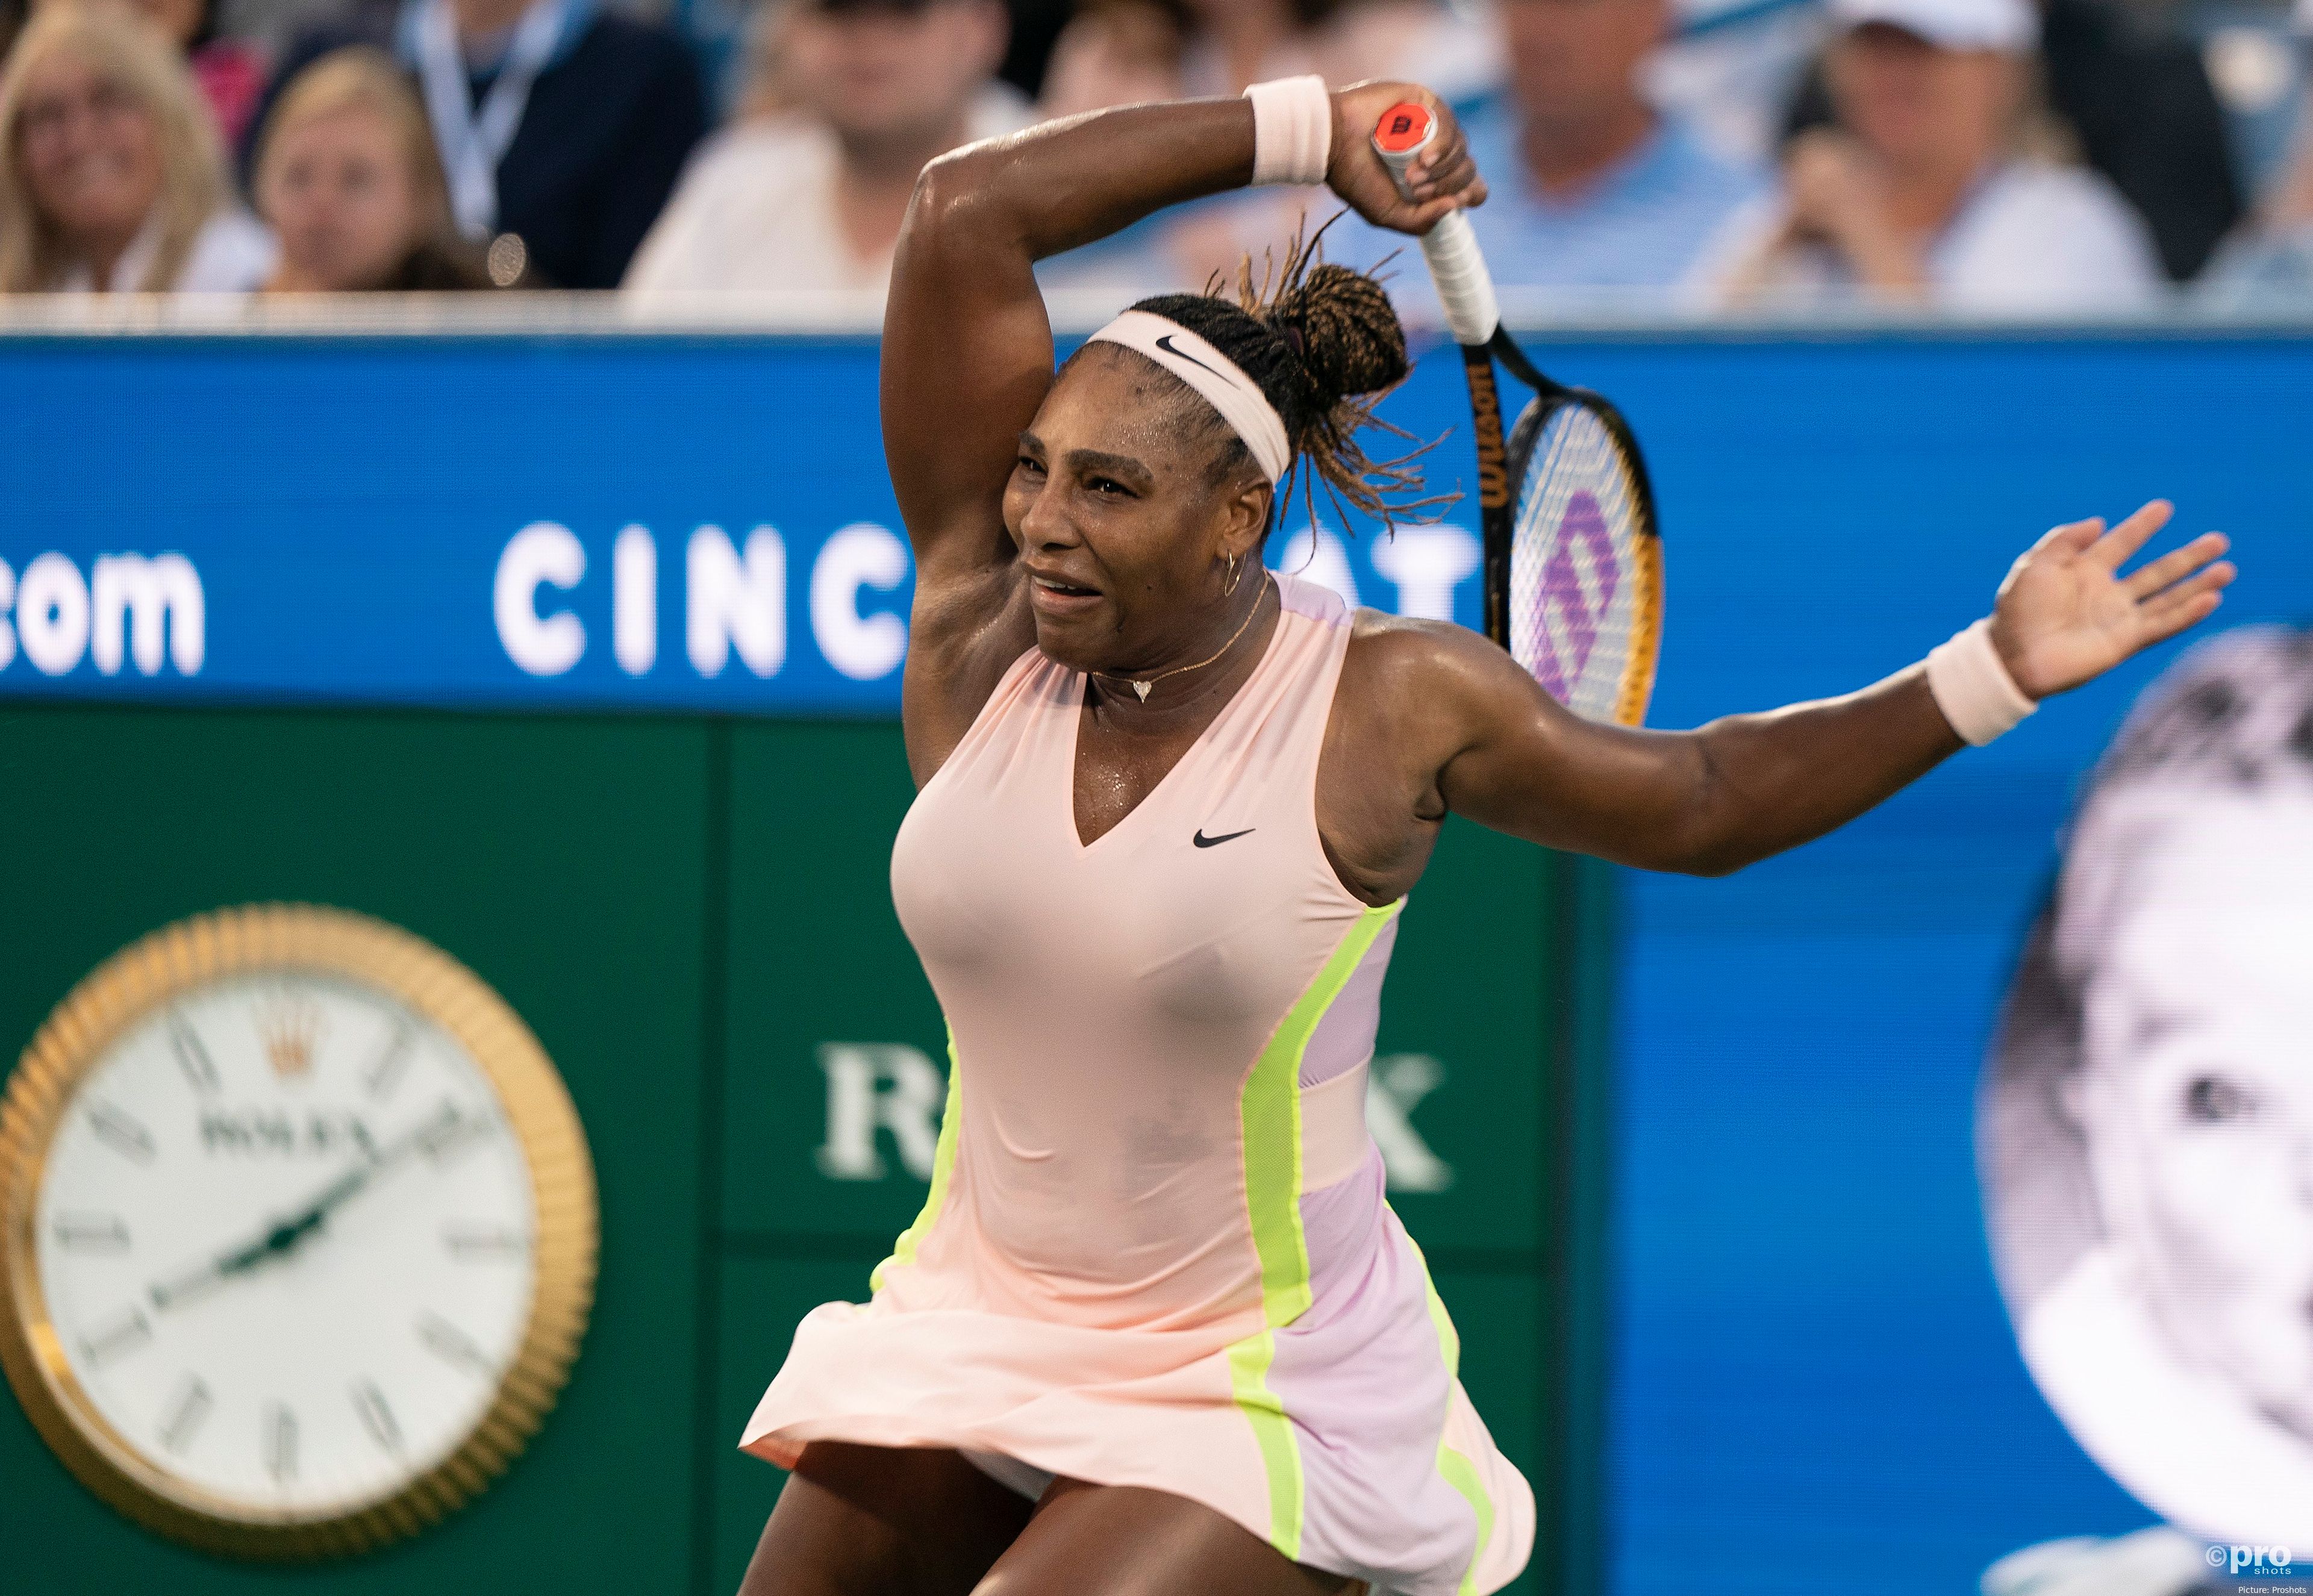 Serena Williams remains the most successful player in women's singles category, having won 23 Grand Slam titles.&nbsp;